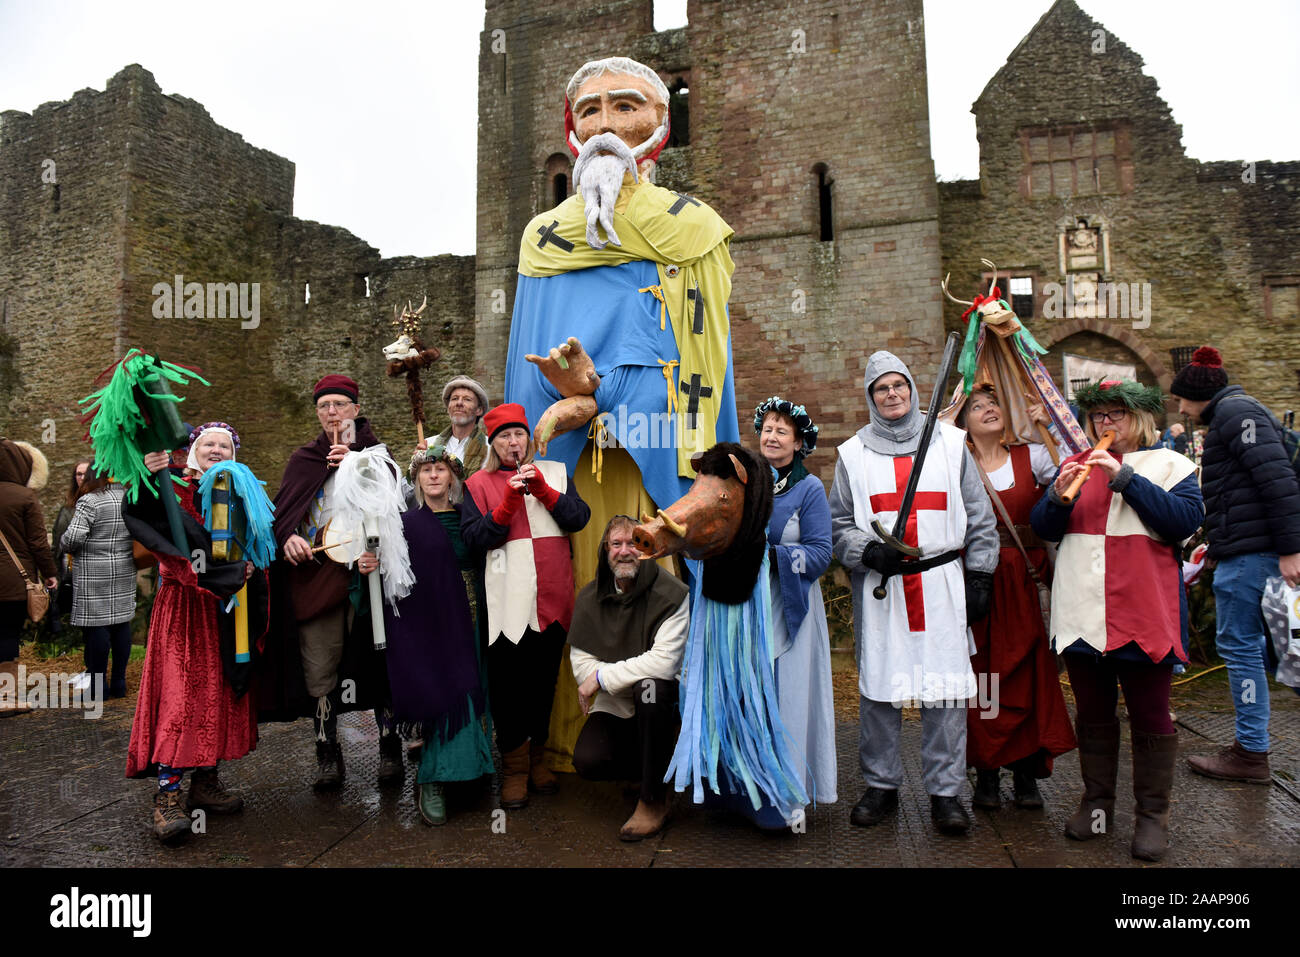 Ludlow, Shropshire, UK. 23rd November 2019. Ludlow Medieval Christmas Fayre 23rd November 2019 held in the grounds of ancient castle. The Severn Blazers minstrels entertaining visitors. Credit: David Bagnall/Alamy Live News Stock Photo